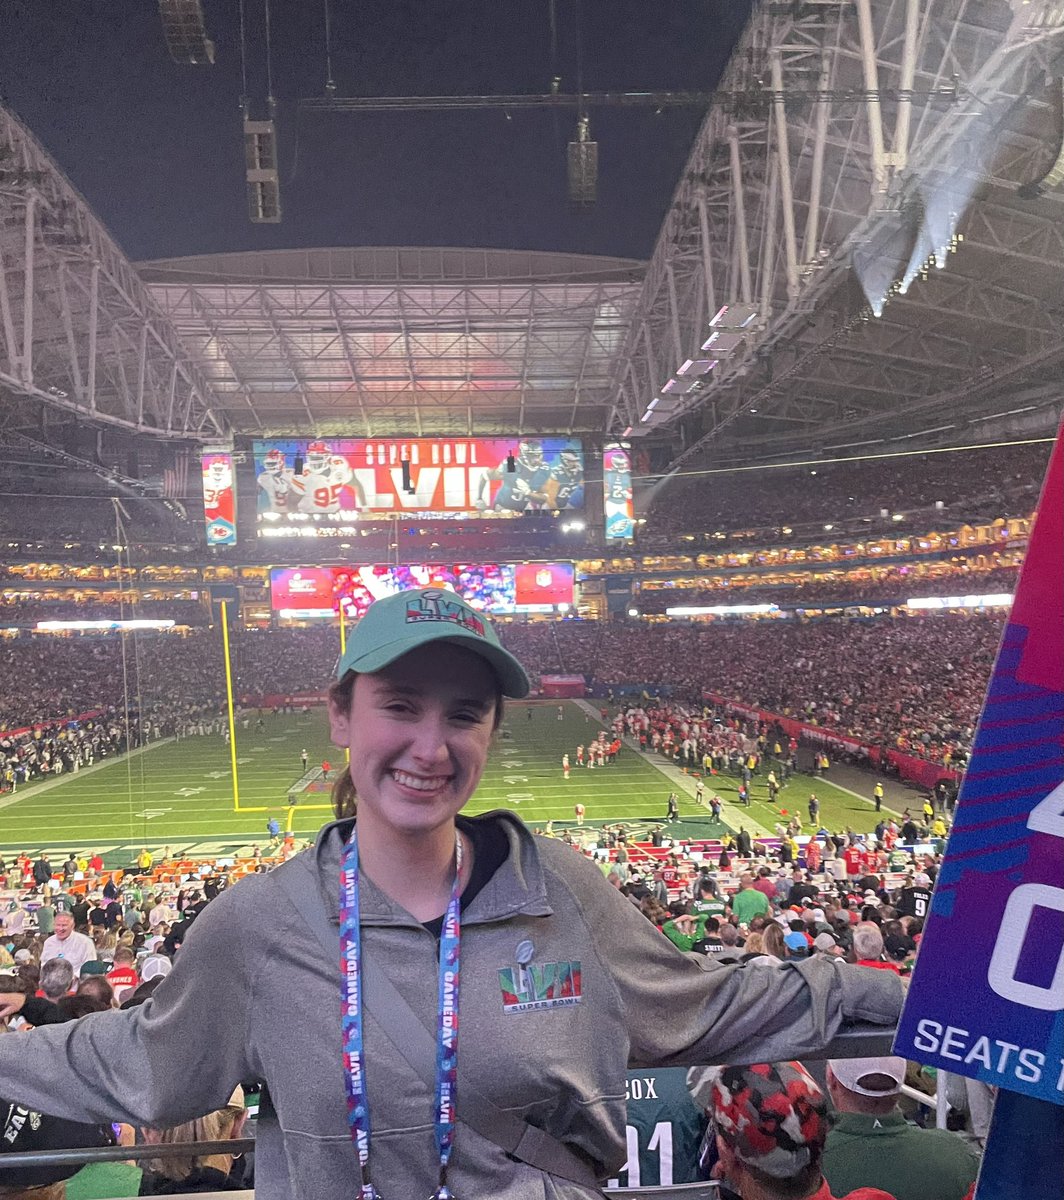 This was the craziest week ever. Thank you so much @iamlivingsport and @AZSuperBowl ❤️